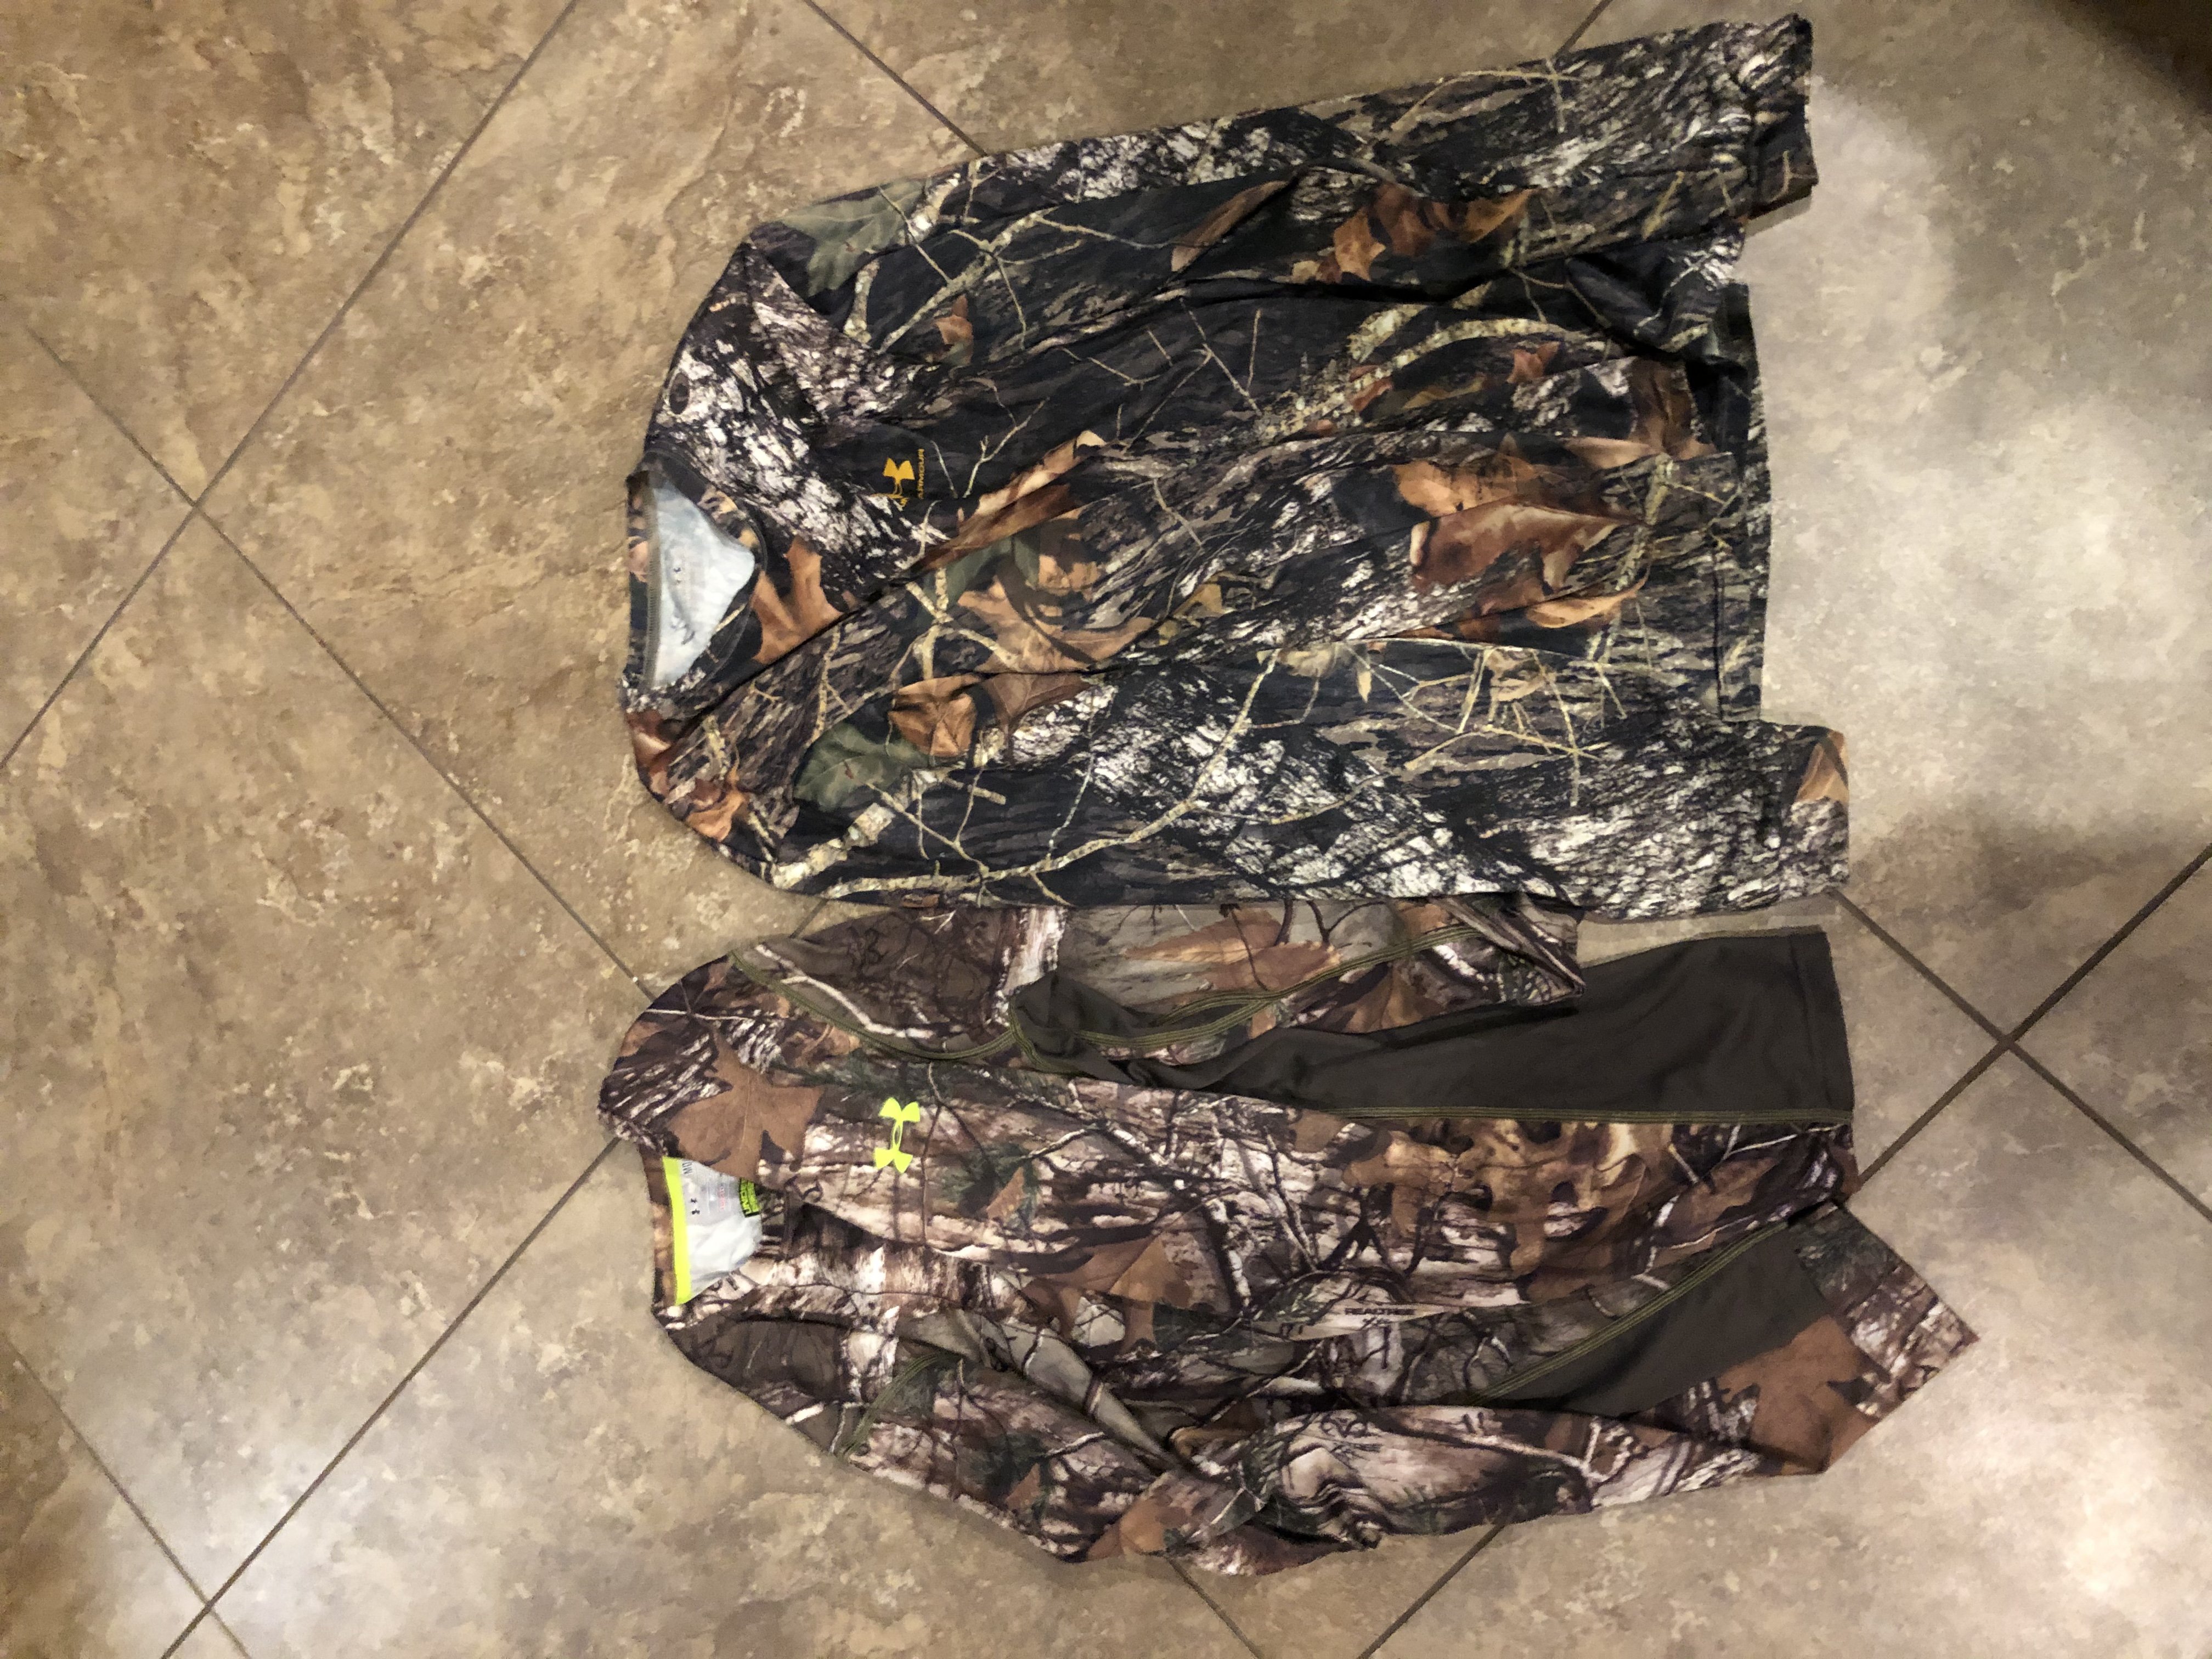 Under Armour Camo Gear - Classified Ads - CouesWhitetail.com Discussion ...